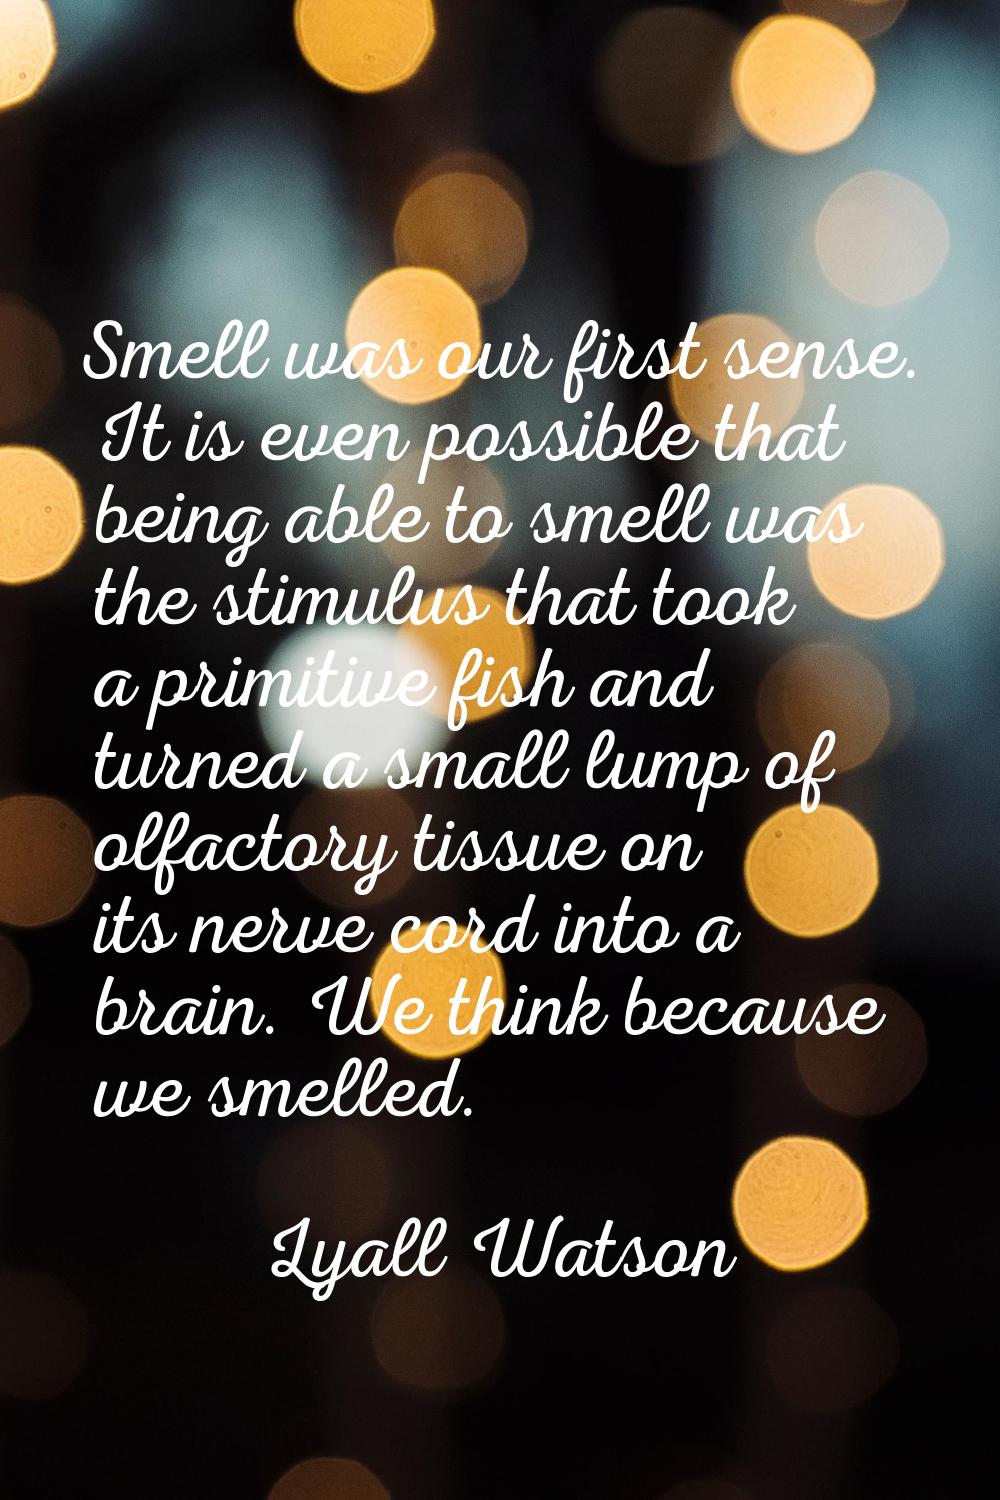 Smell was our first sense. It is even possible that being able to smell was the stimulus that took 